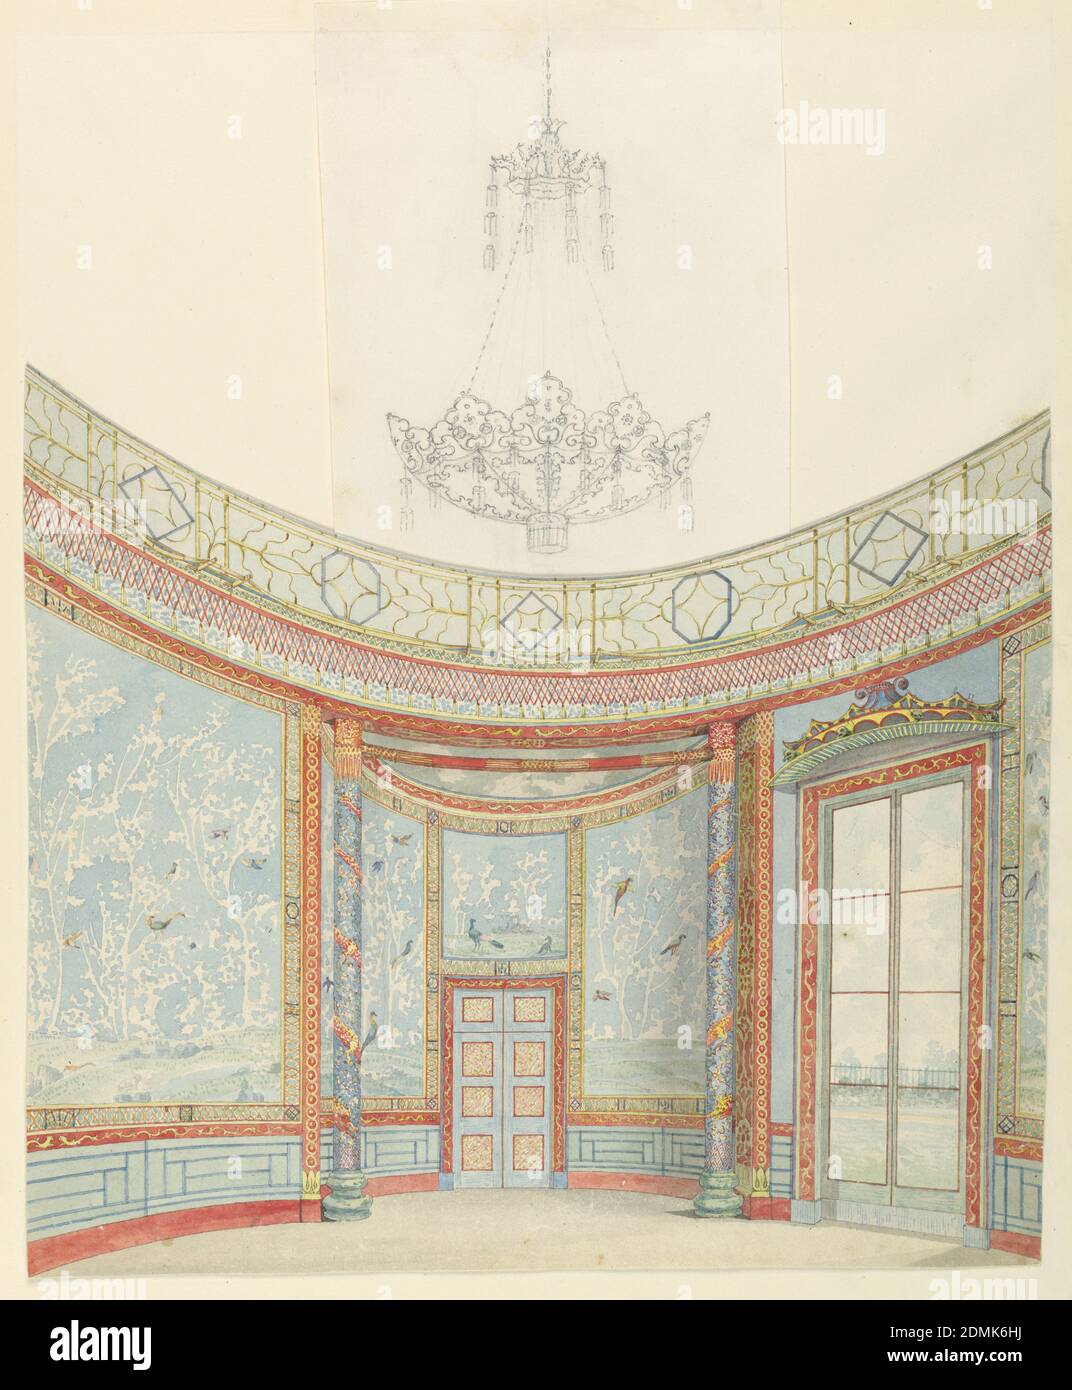 Design for the Decoration of the Saloon, Royal Pavillion, Brighton, Frederick Crace, English, 1779–1859, Brush and watercolor, graphite on multiple sheets white wove paper, (a): Design of a section of south end of the circular room, showing the coved semicircular recess with doors. Window at right. The walls are hung with large panels of Chinese wallpaper of flowers and collaged birds, the base and mouldings are painted, as well as the columns at the entrance to the recess., (b): Rendering of the Salon as it looked in 1802 Stock Photo